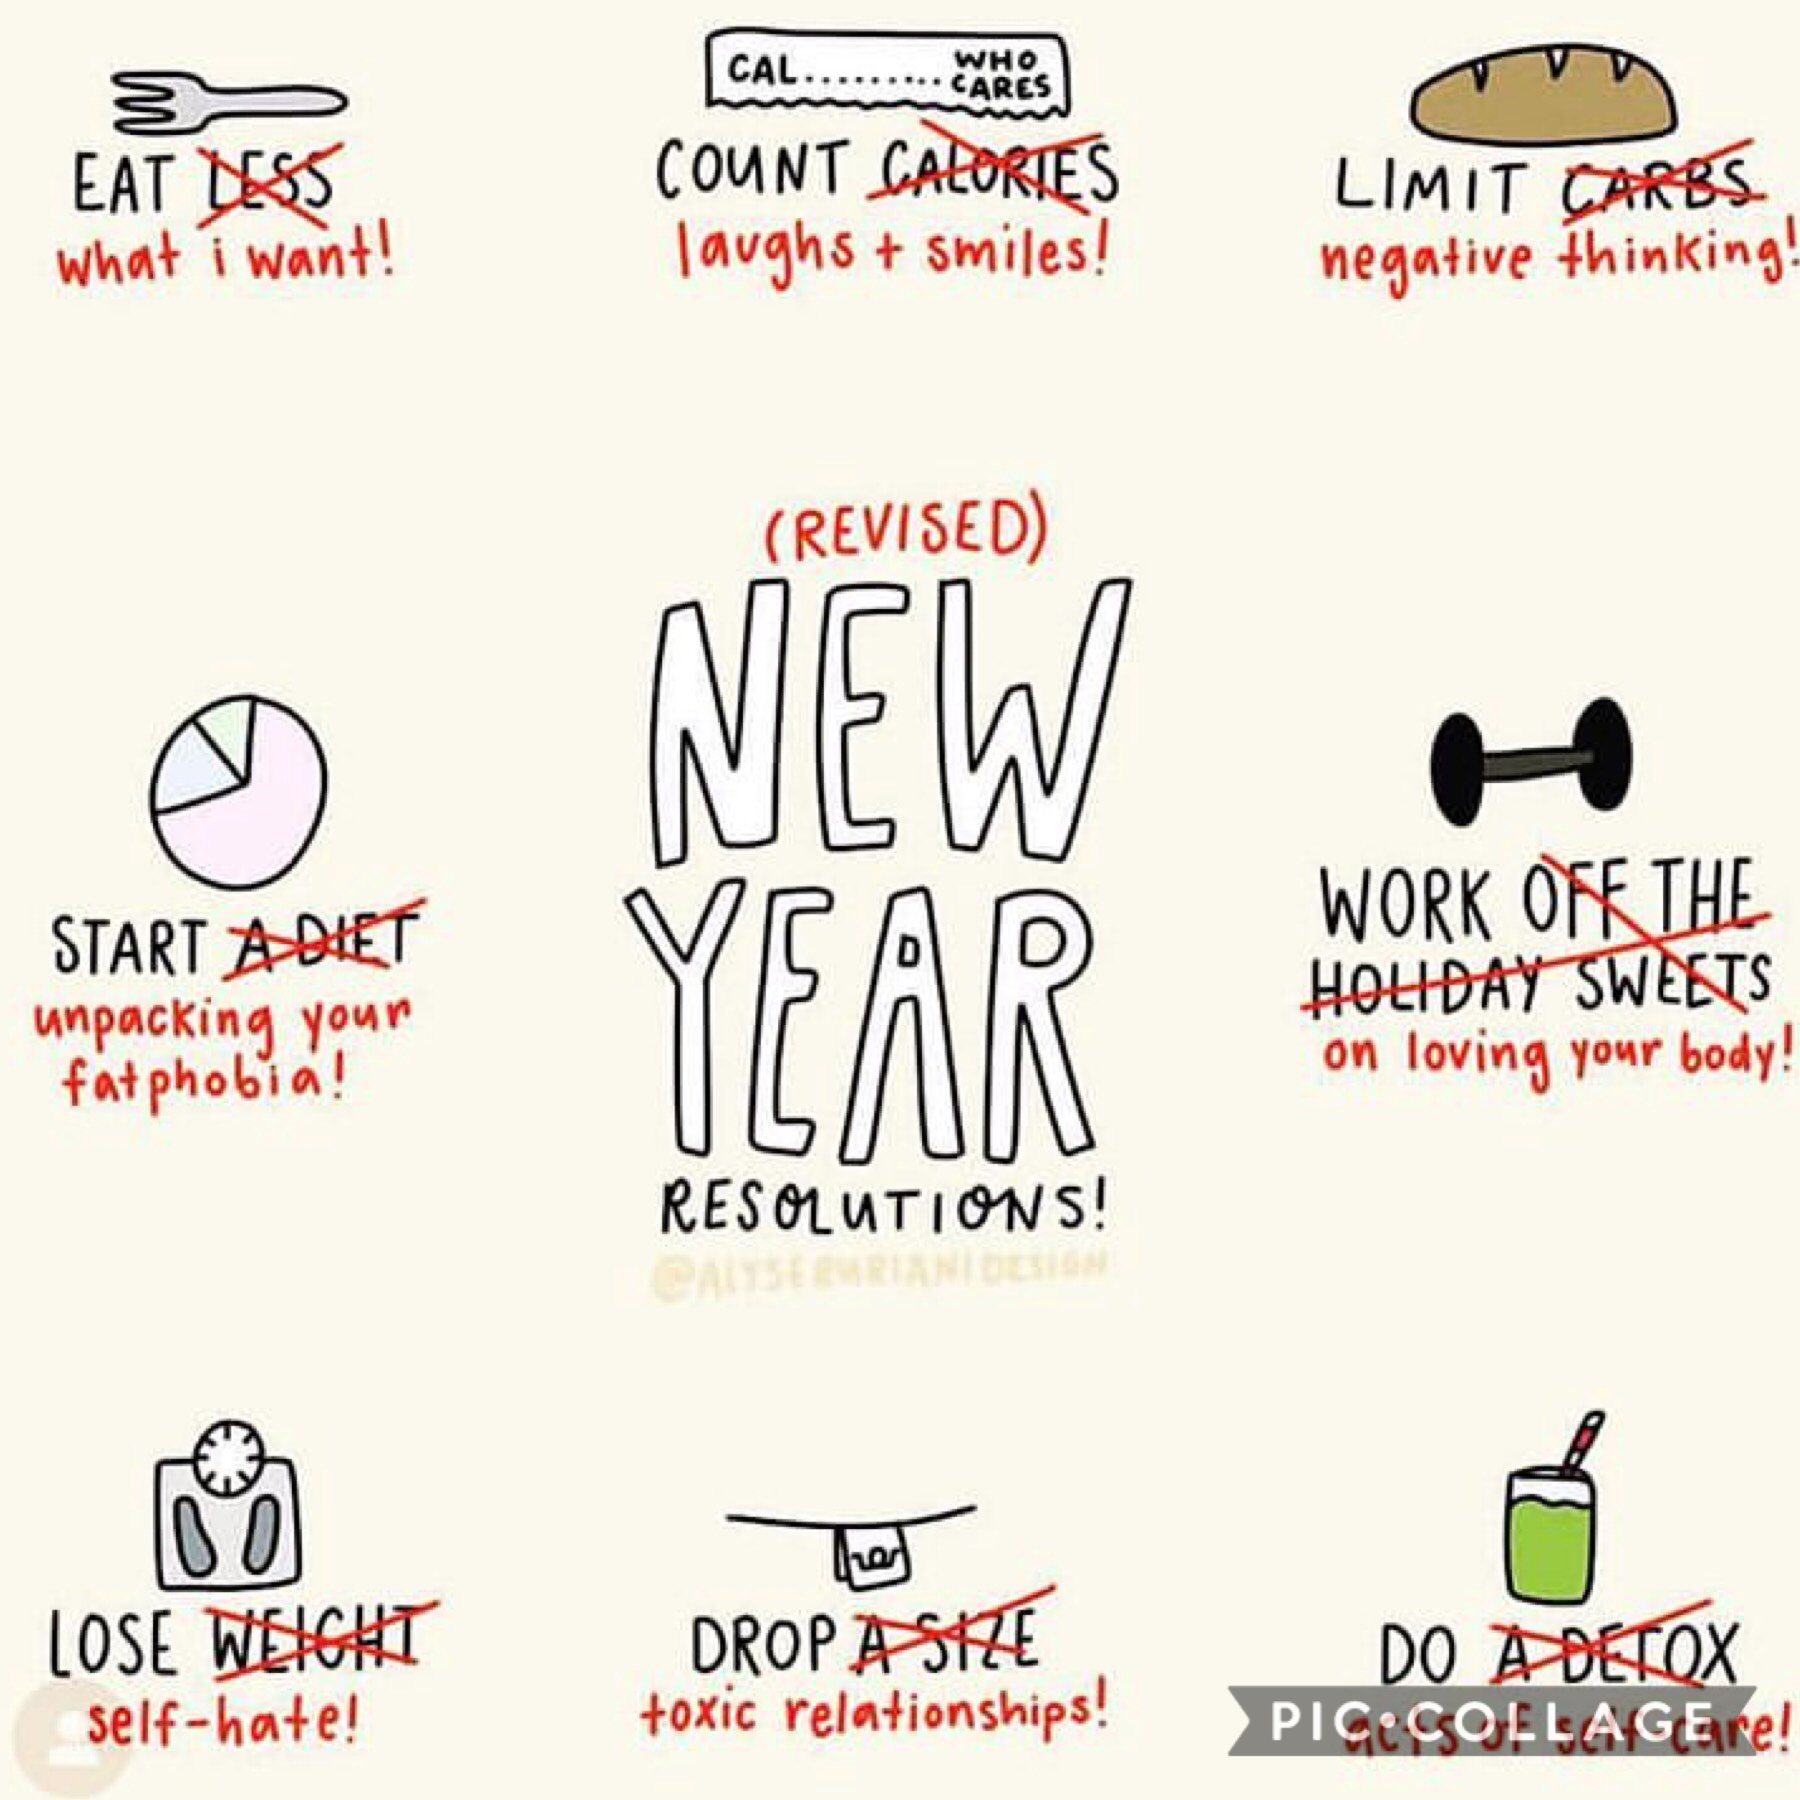 Comment your new year’s resolutions! Mine are:
1. Self-love💓
2. Not lose any earbuds😅
3. Eat healthy
4. Exercise
5. Kindness

✨💓Stay Strong Everyone💓✨